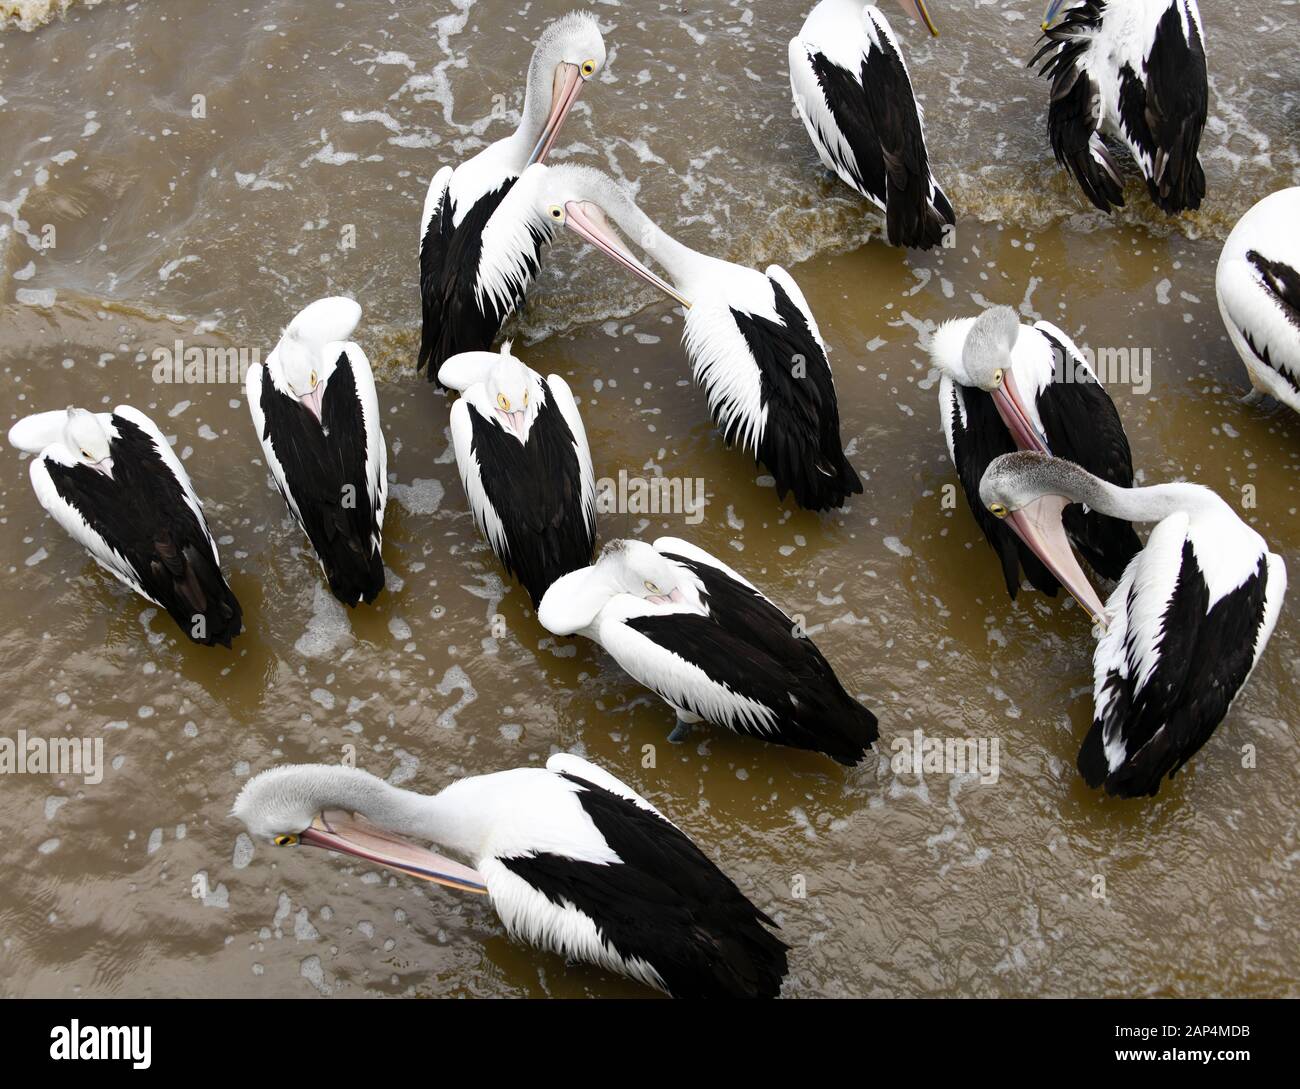 A flock of Pelicans resting and cleaning their feathers in the shallows on a beach Stock Photo